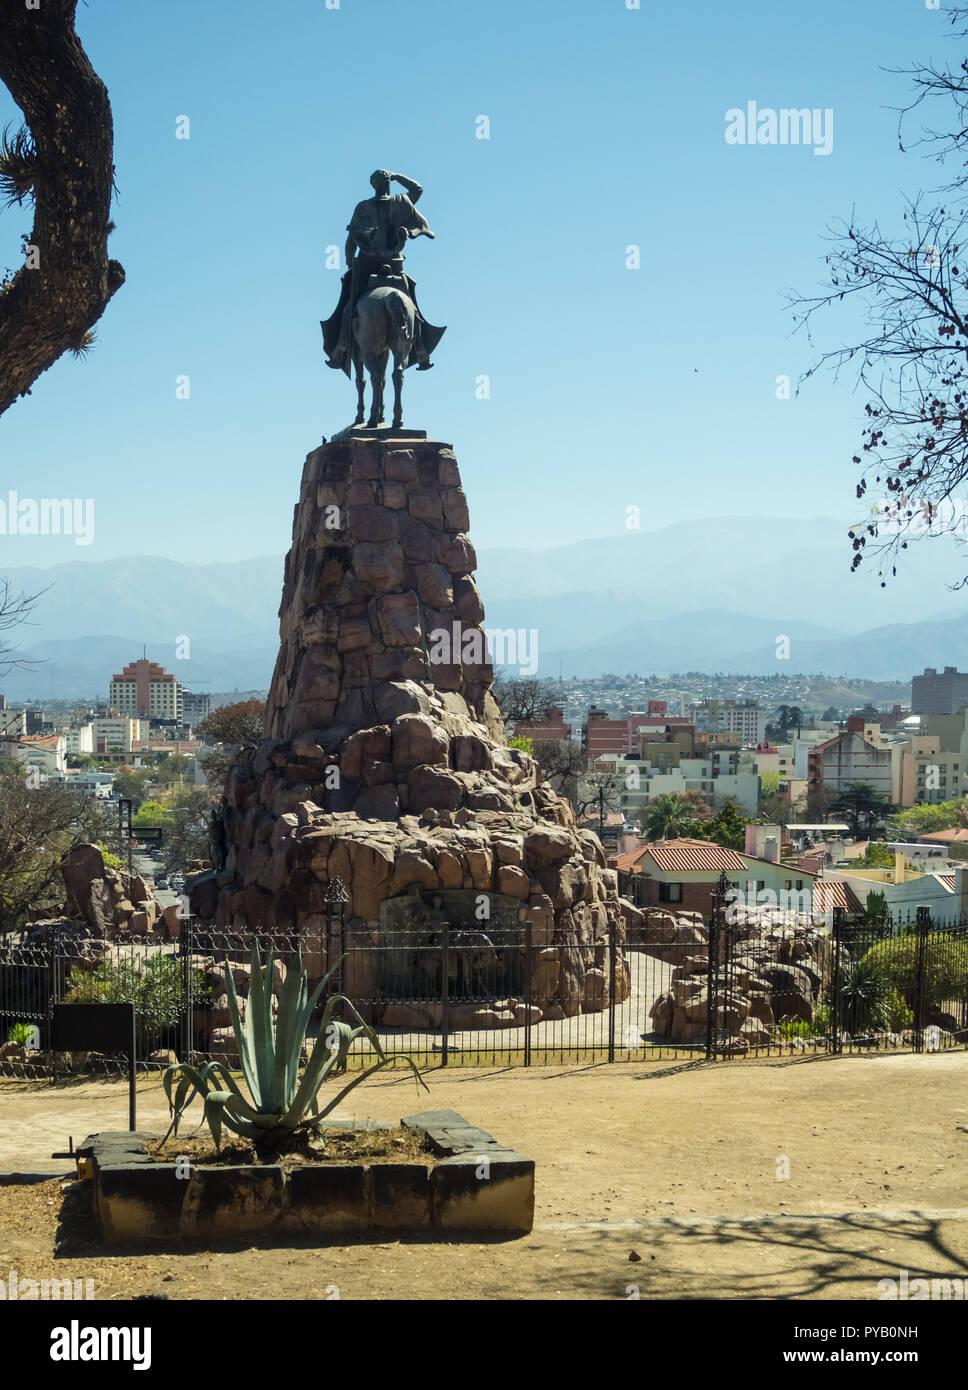 Monument to Martin Miguel de Guemes, a military leader and caudillo in Argentina north west Stock Photo